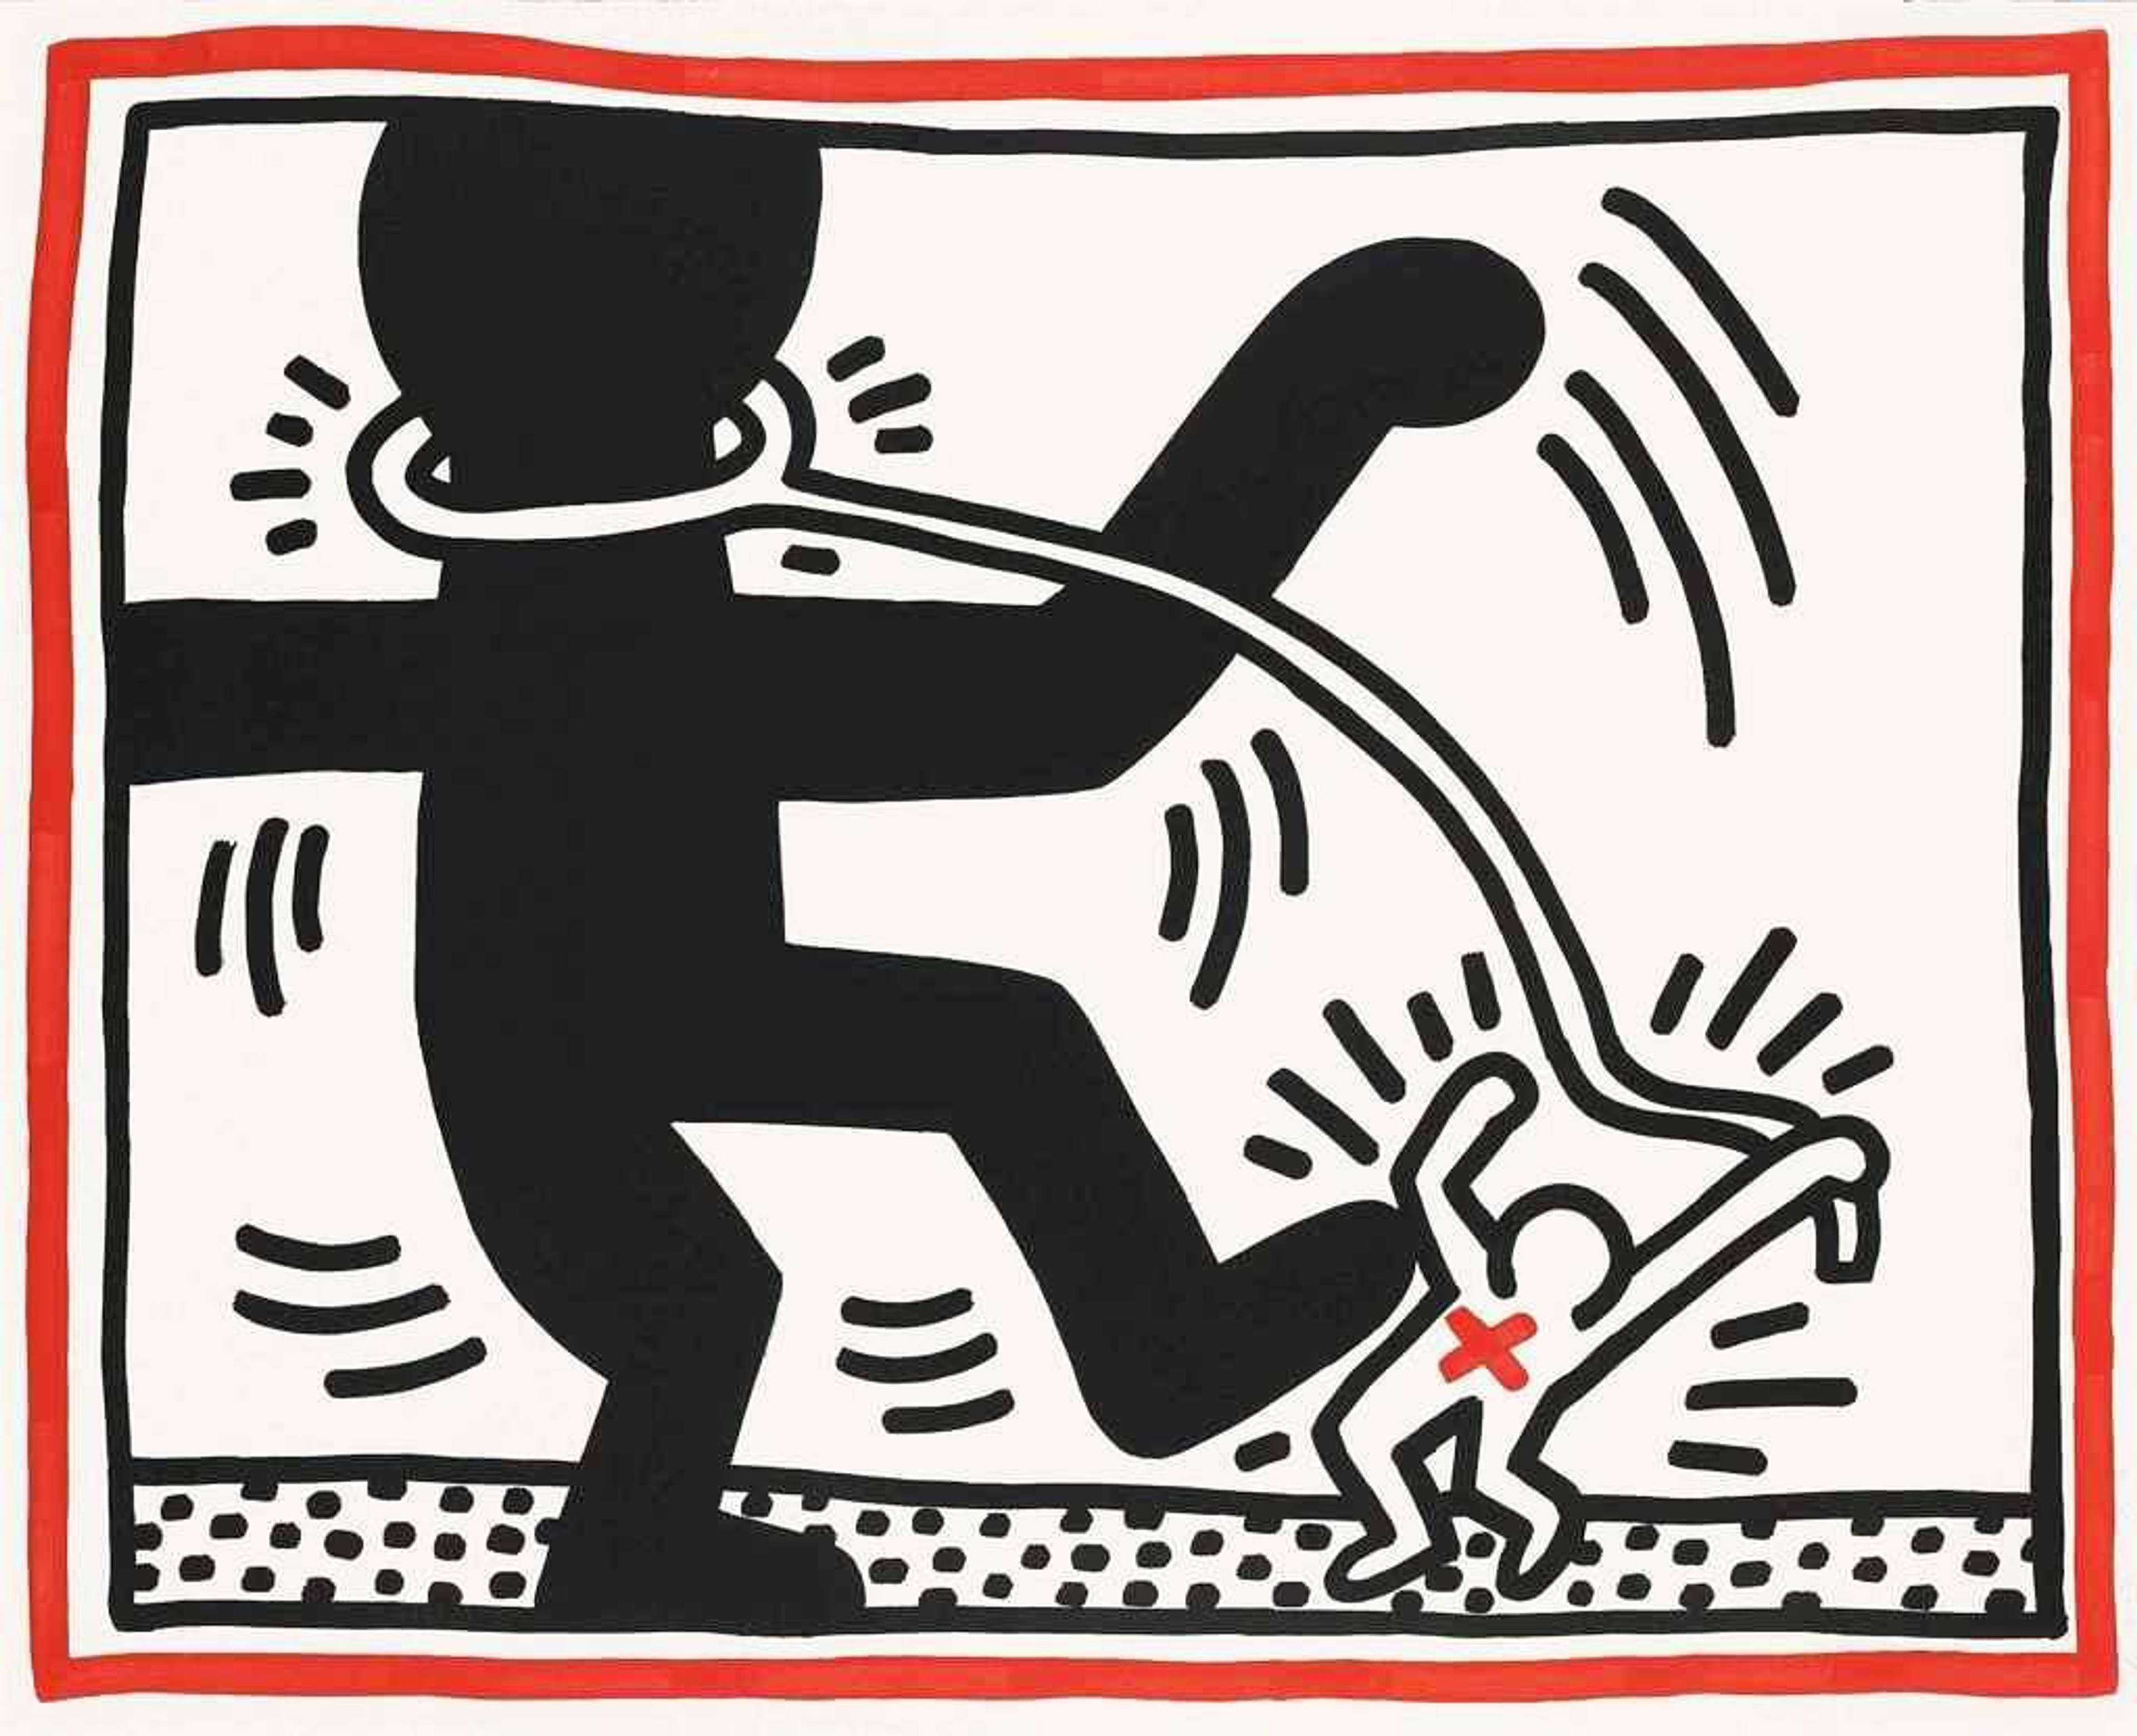 Keith Haring’s Free South Africa 2. A Pop Art print of a black figure raising its foot, stepping on the outline of a white figure in the style of Pop Art.